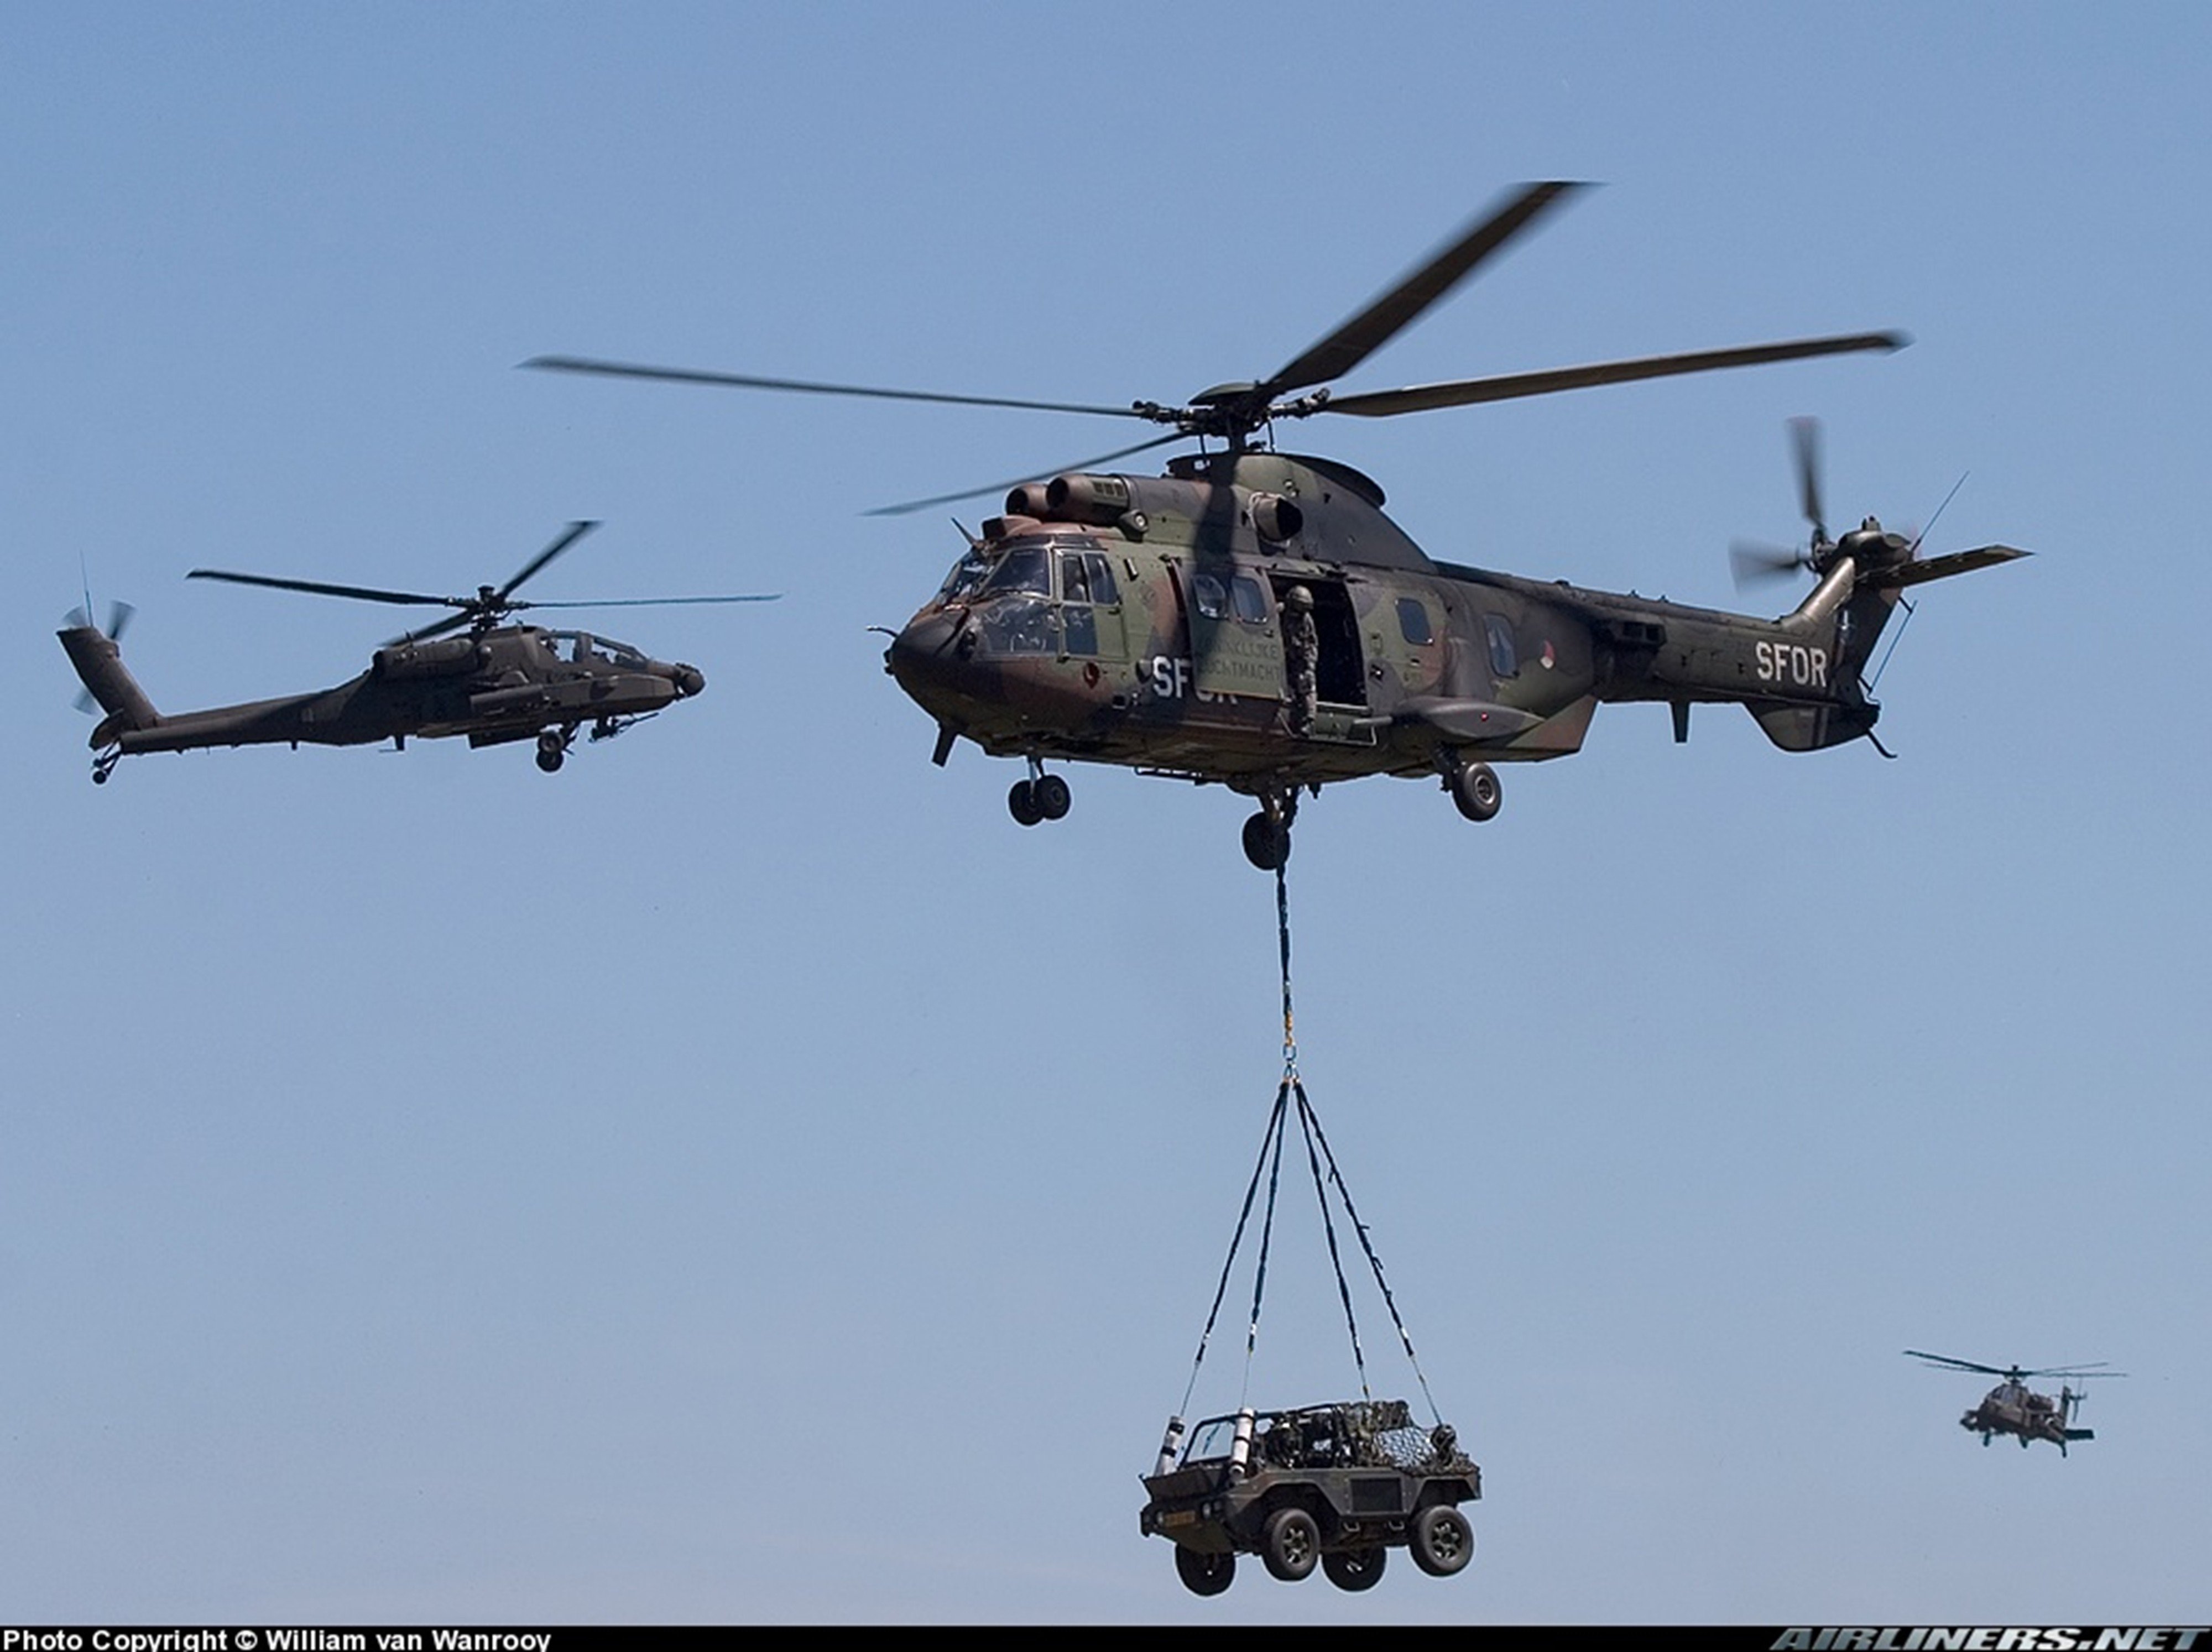 helicopter, Aircraft, Transport, Cargo, Czech republic, Military, Army Wallpaper